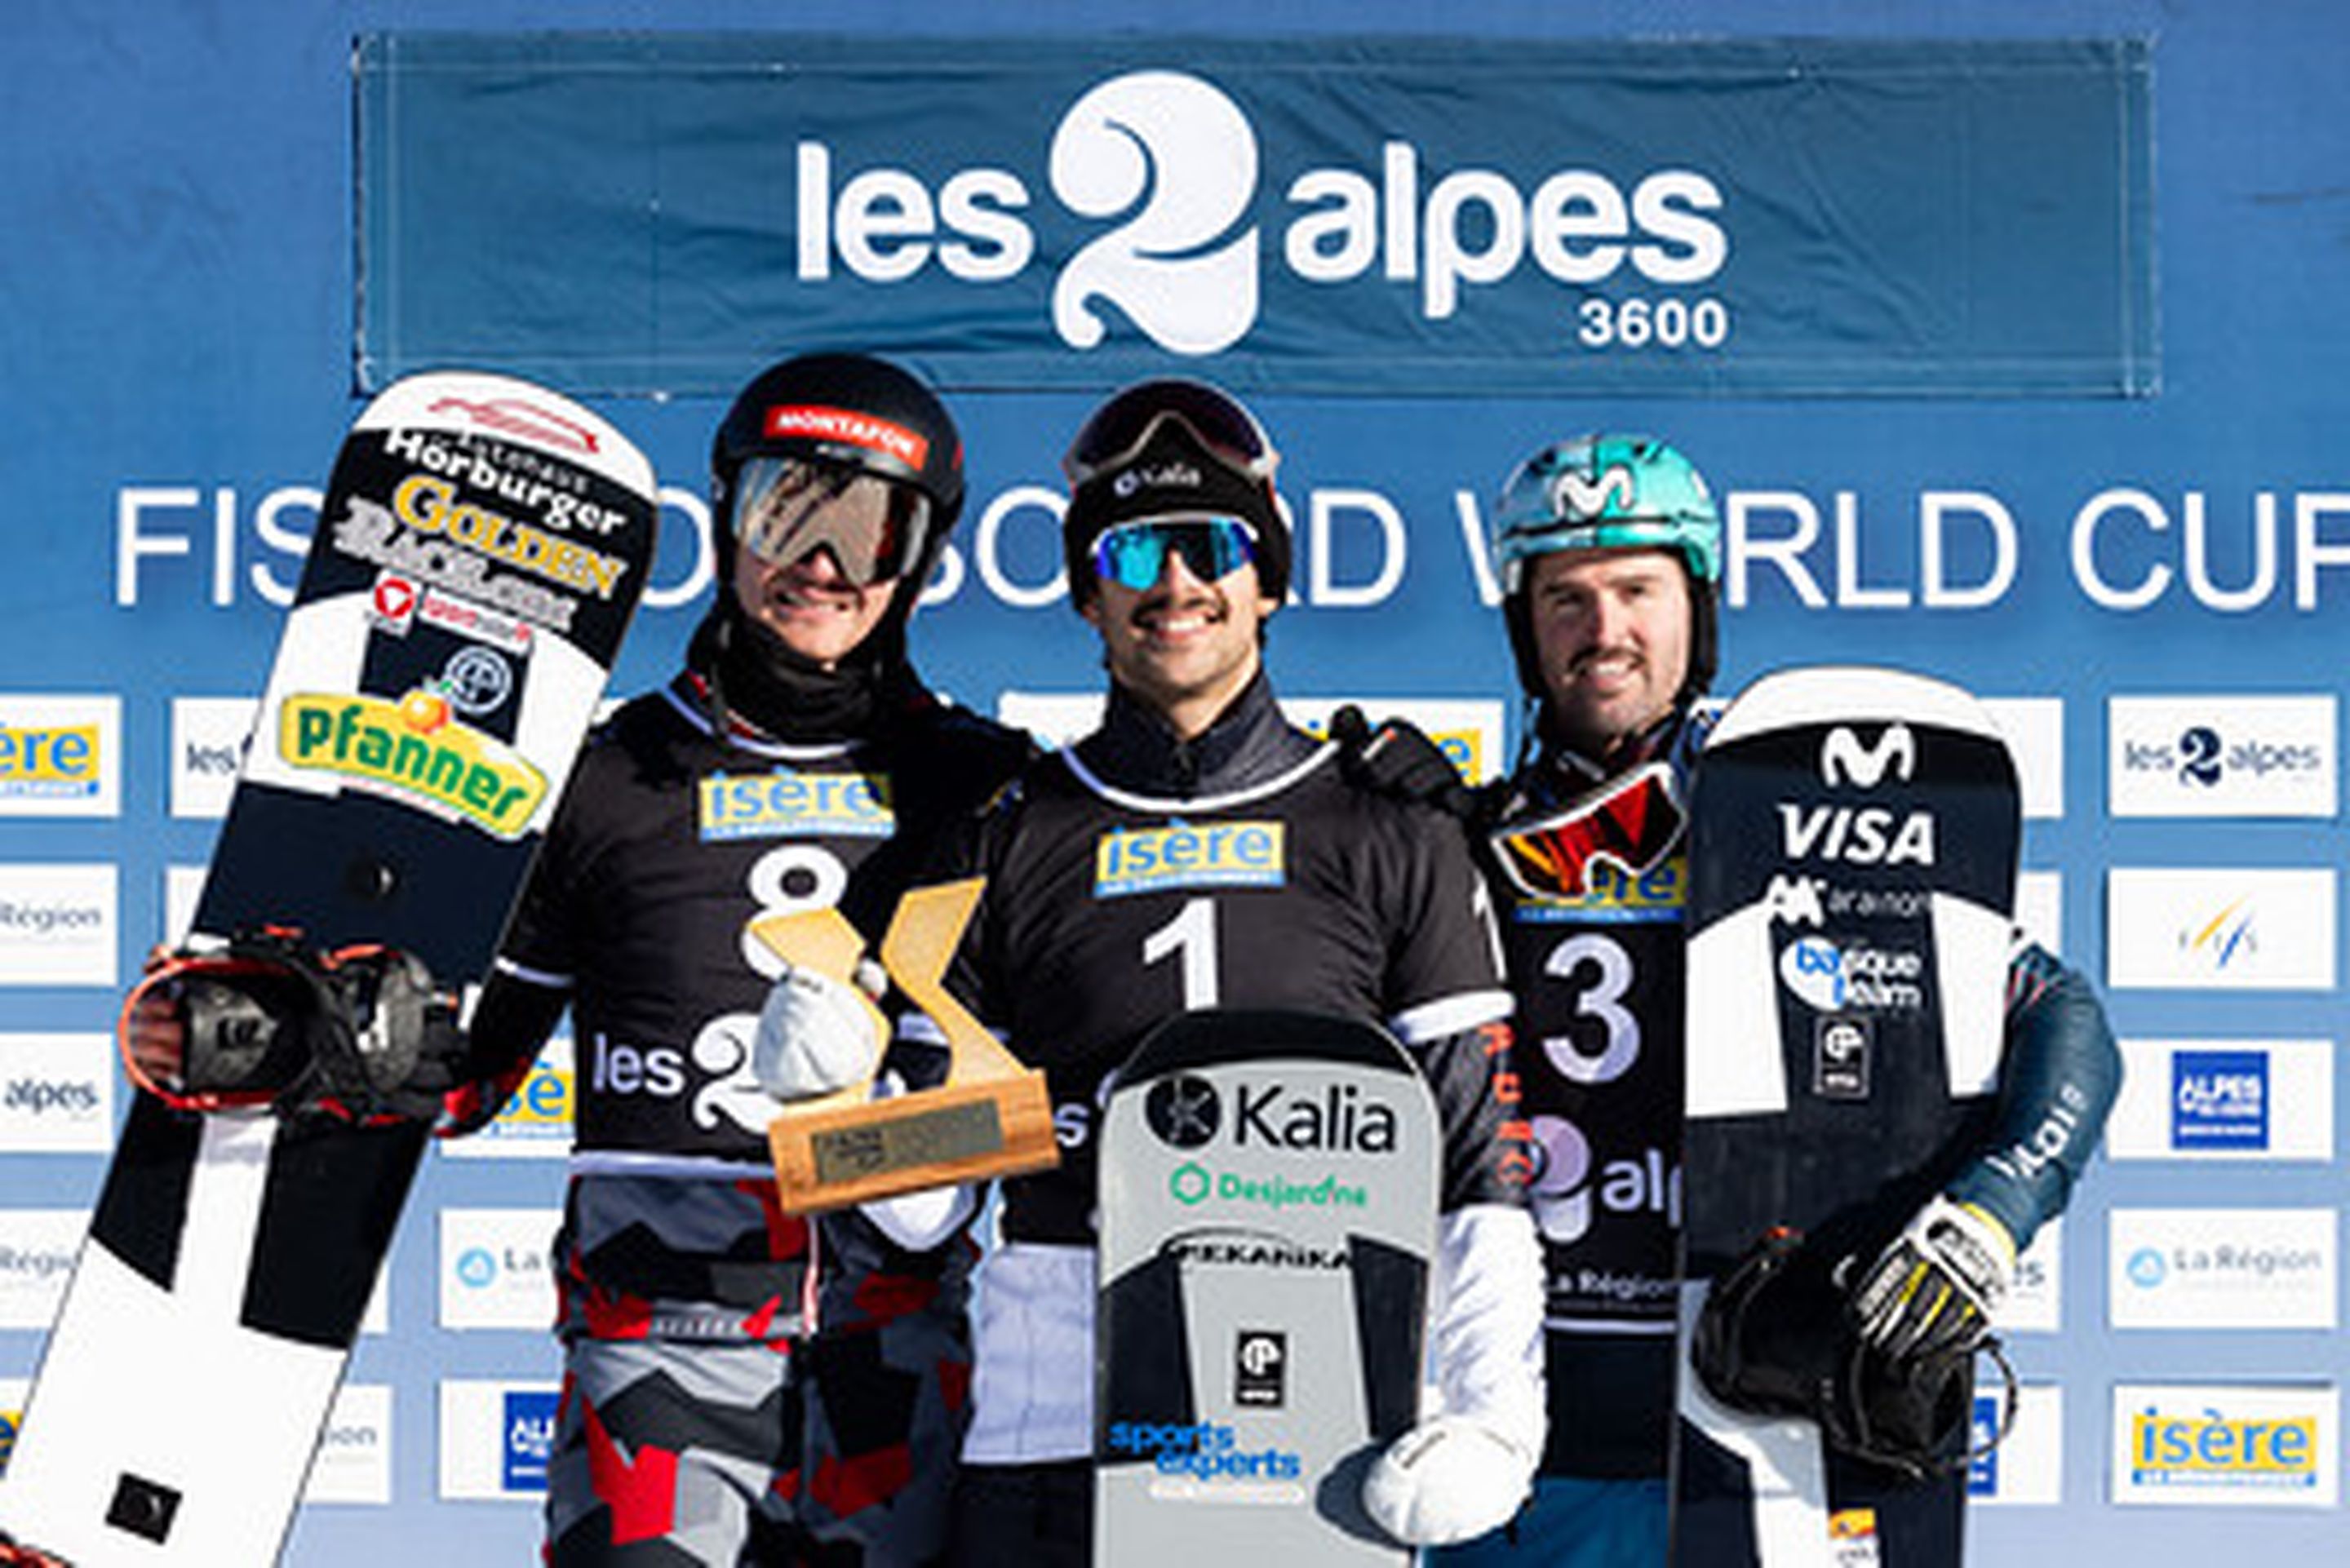 Eguibar (right) made the podium in Les Deux Alpes alongside 'man to beat' Eliot Grondin (centre)